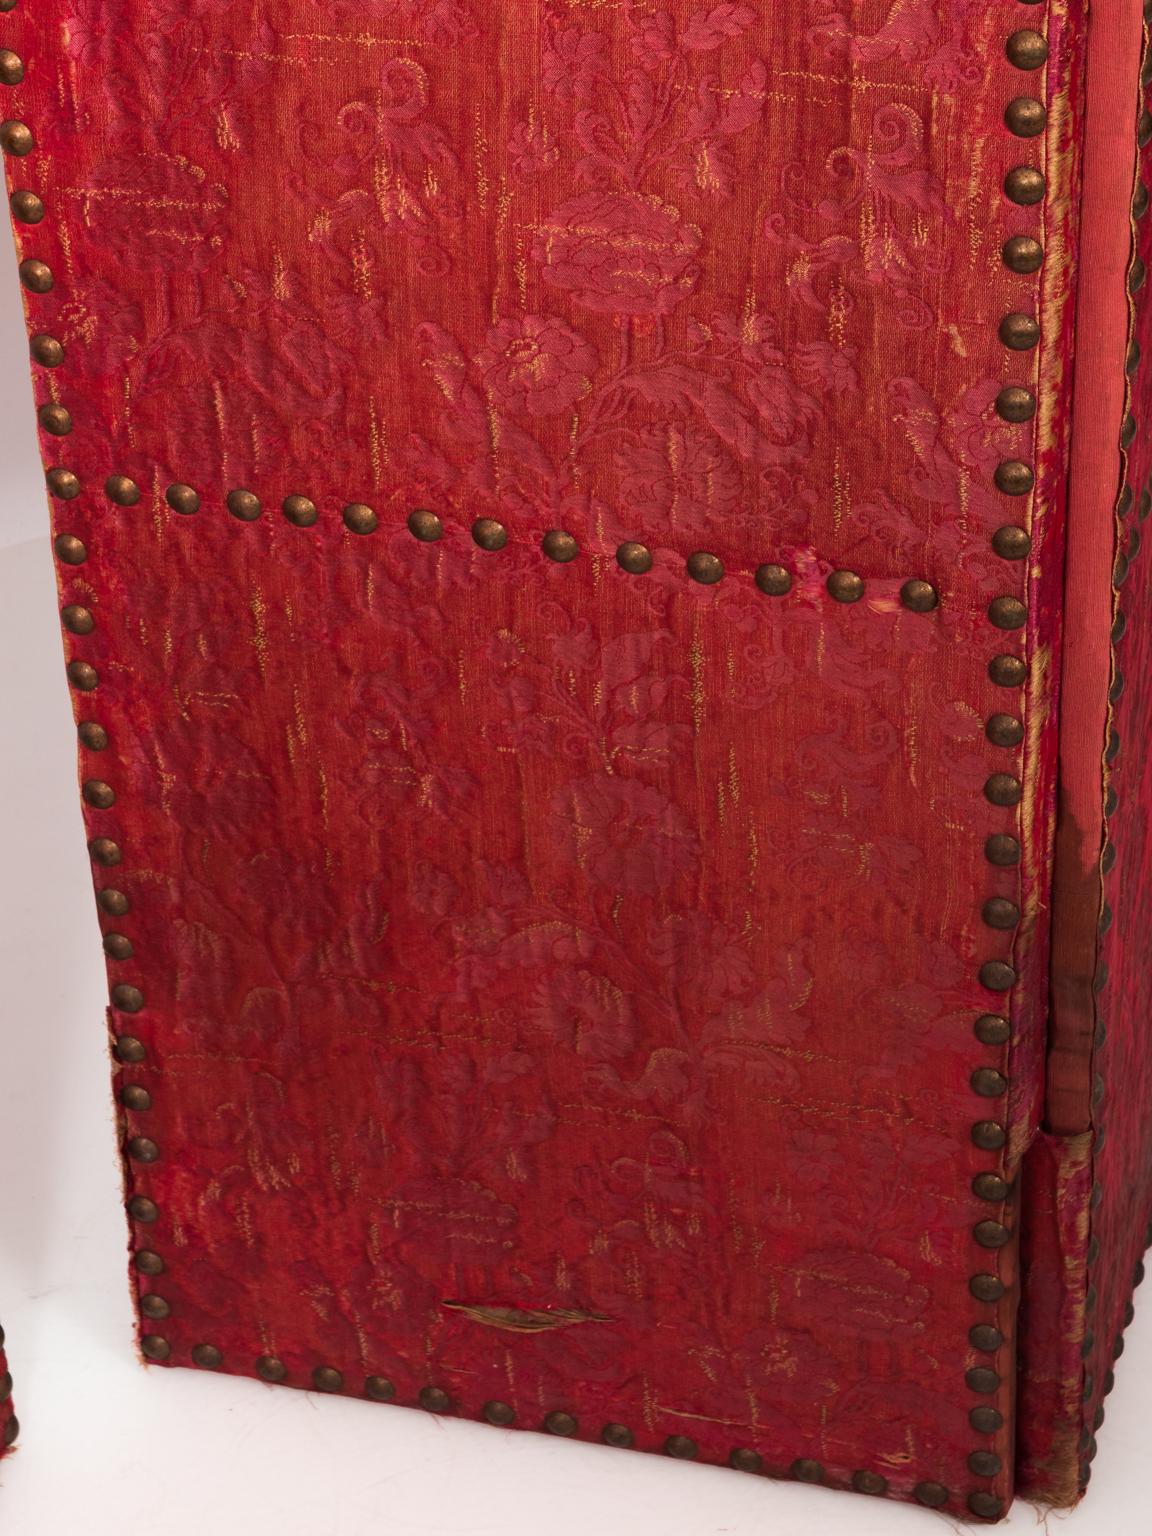 19th century Italian red silk damask on Moorish style screens with large nailheads. There are tears, and signs of discoloration in the silk. The fabric is original, dating back to early 19th century.
 